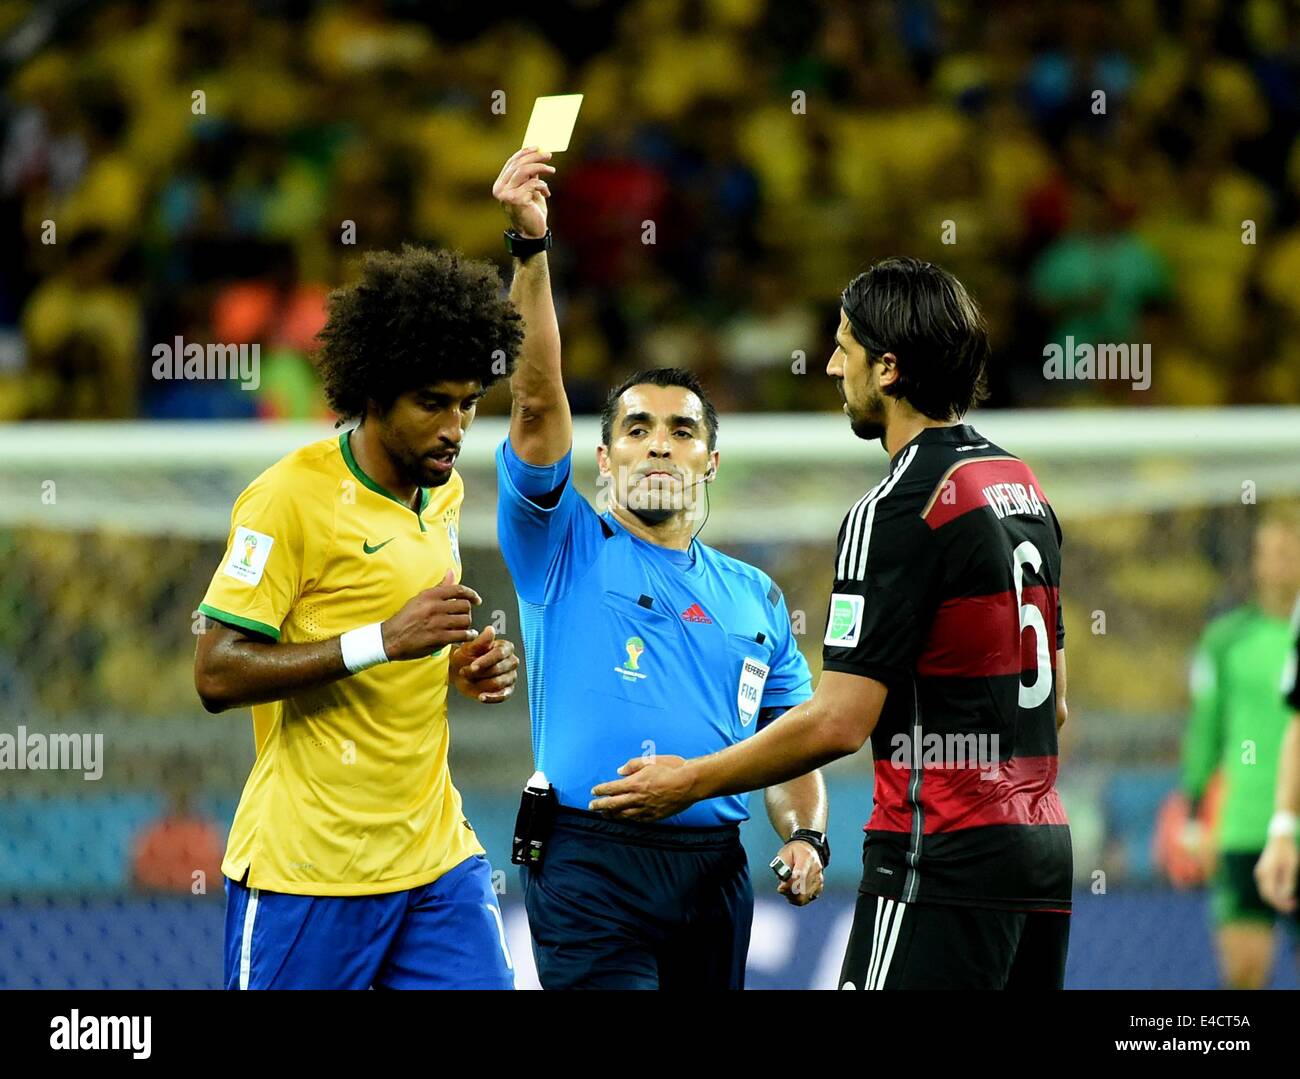 Belo Horizonte, Brazil. 8th July, 2014. Mexico's referee Marco Rodriguez (C) shows a yellow card to Brazil's Dante (L) during a semifinal match between Brazil and Germany of 2014 FIFA World Cup at the Estadio Mineirao Stadium in Belo Horizonte, Brazil, on July 8, 2014. Credit:  Liu Dawei/Xinhua/Alamy Live News Stock Photo